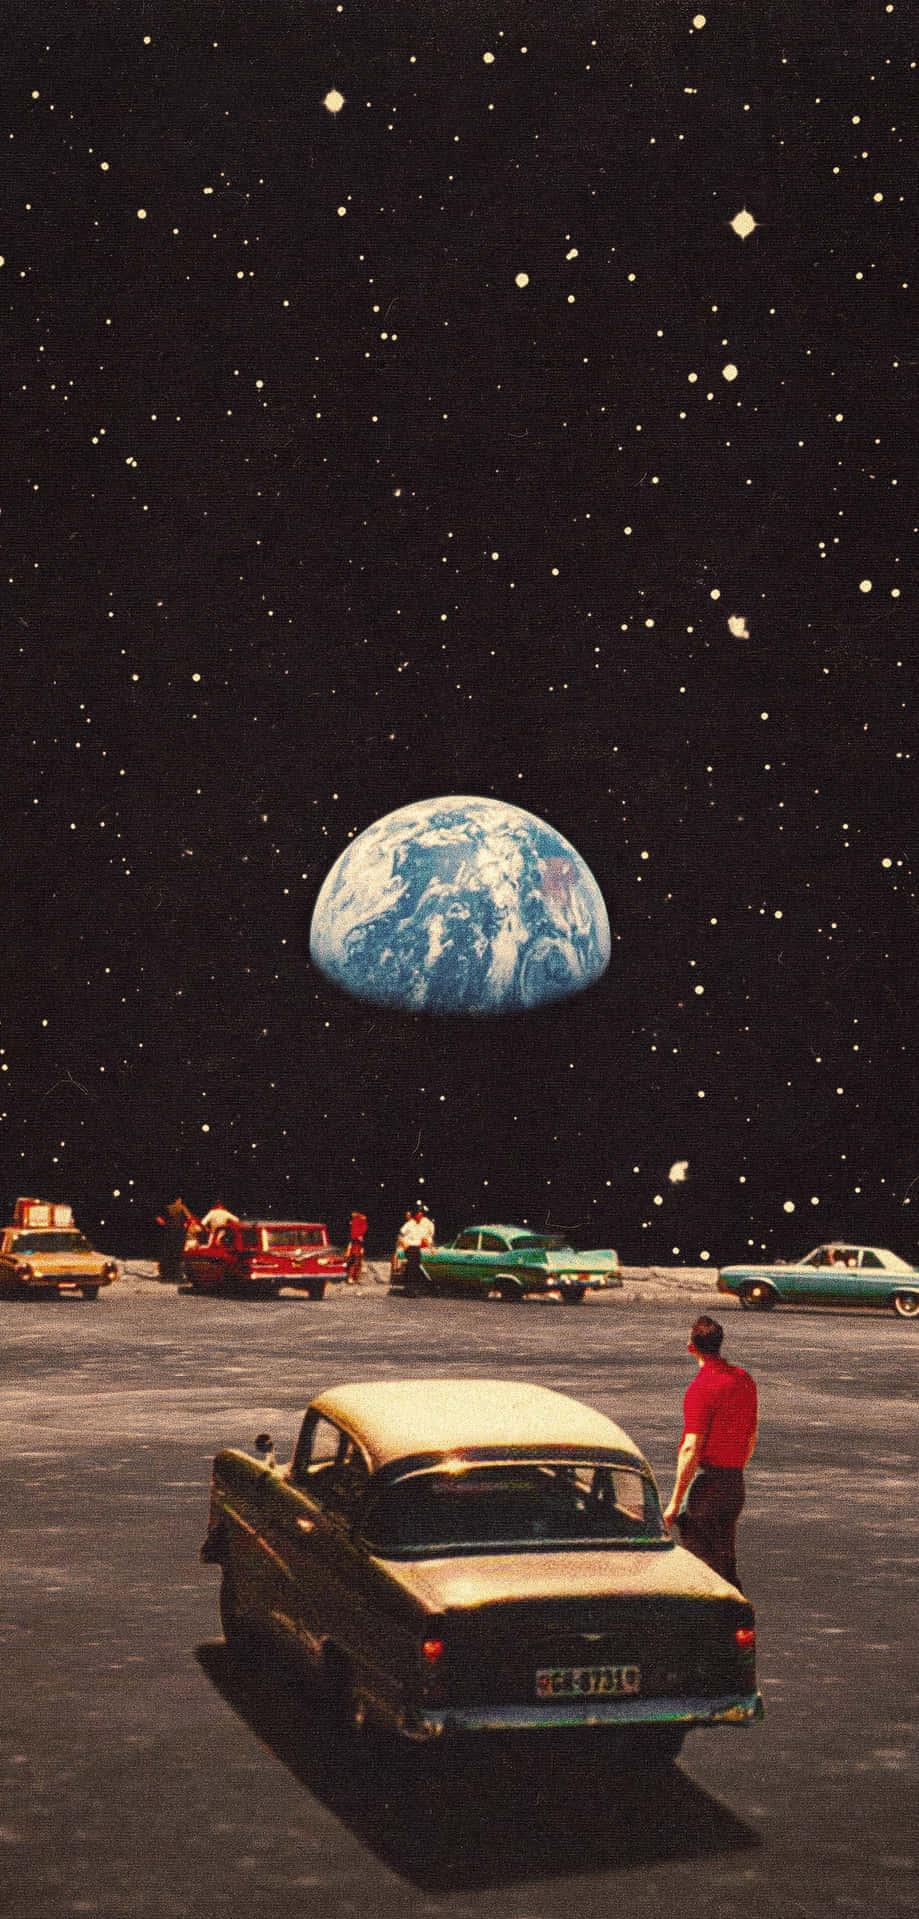 Vintage Trippy Retro Aesthetic Car Parked On The Moon